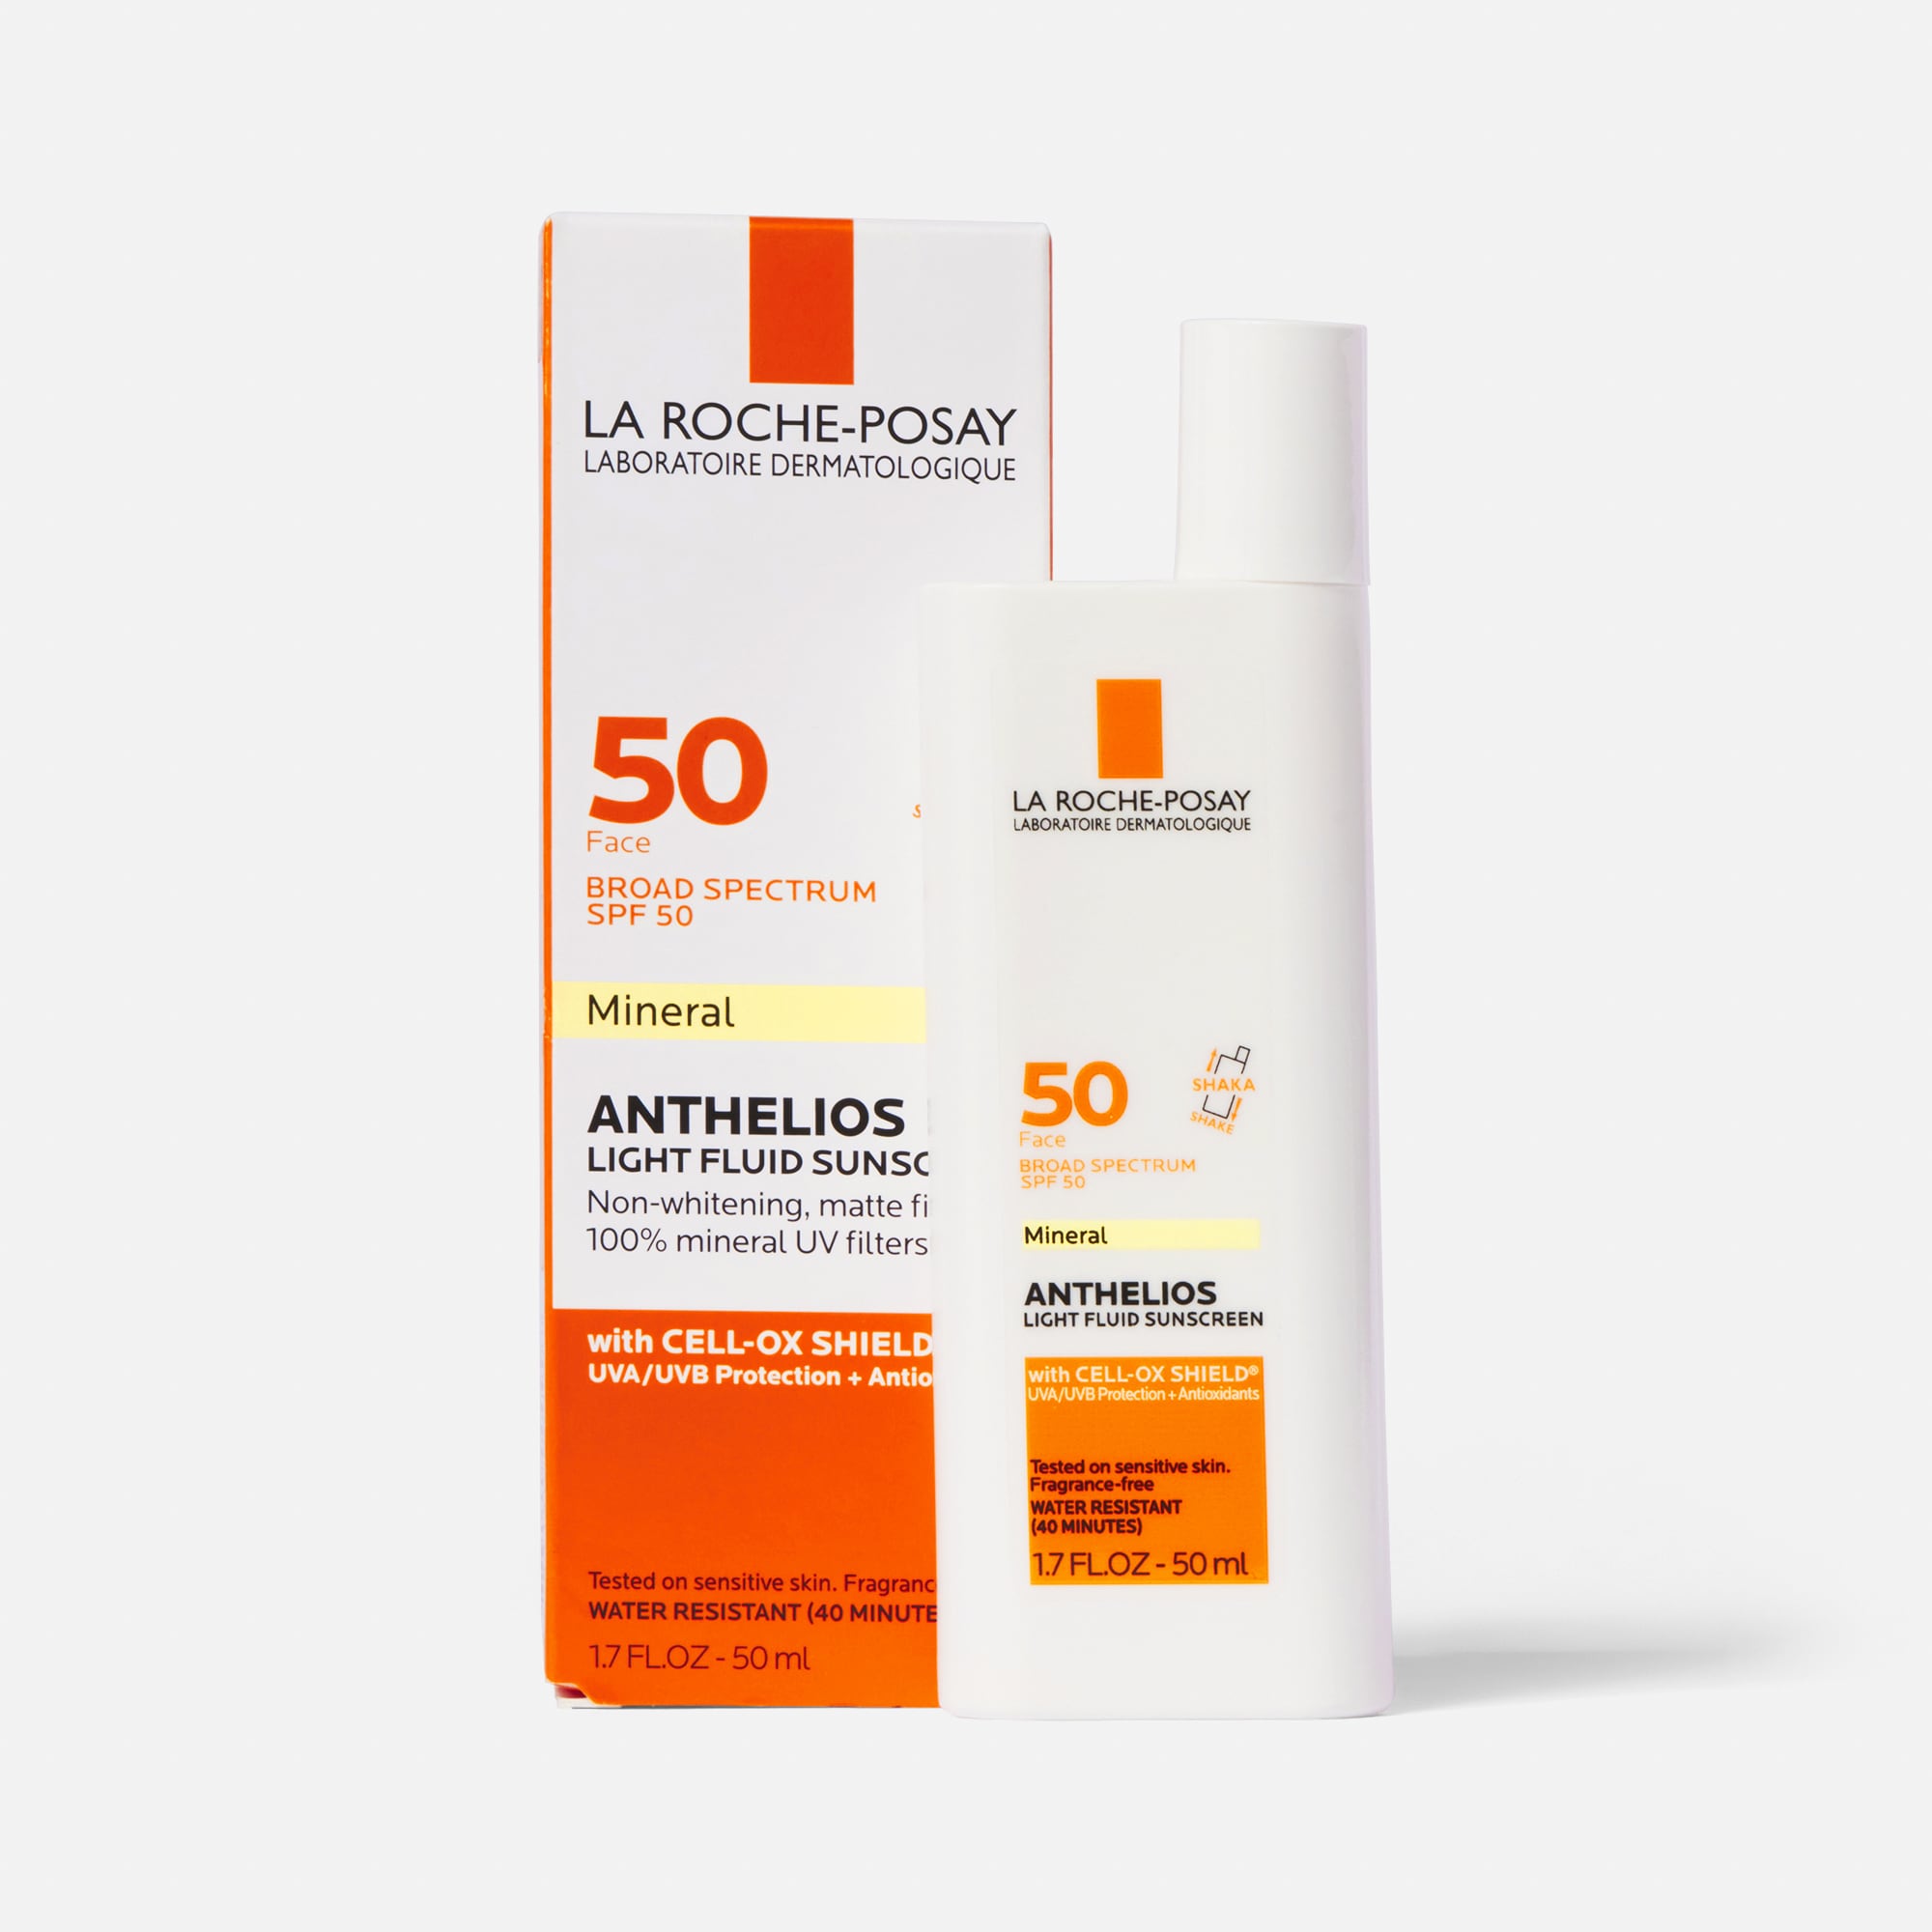 Roche-Posay Anthelios Mineral Sunscreen Ultra-Light Fluid for Face, SPF 50 with Zinc Oxide and fl oz.